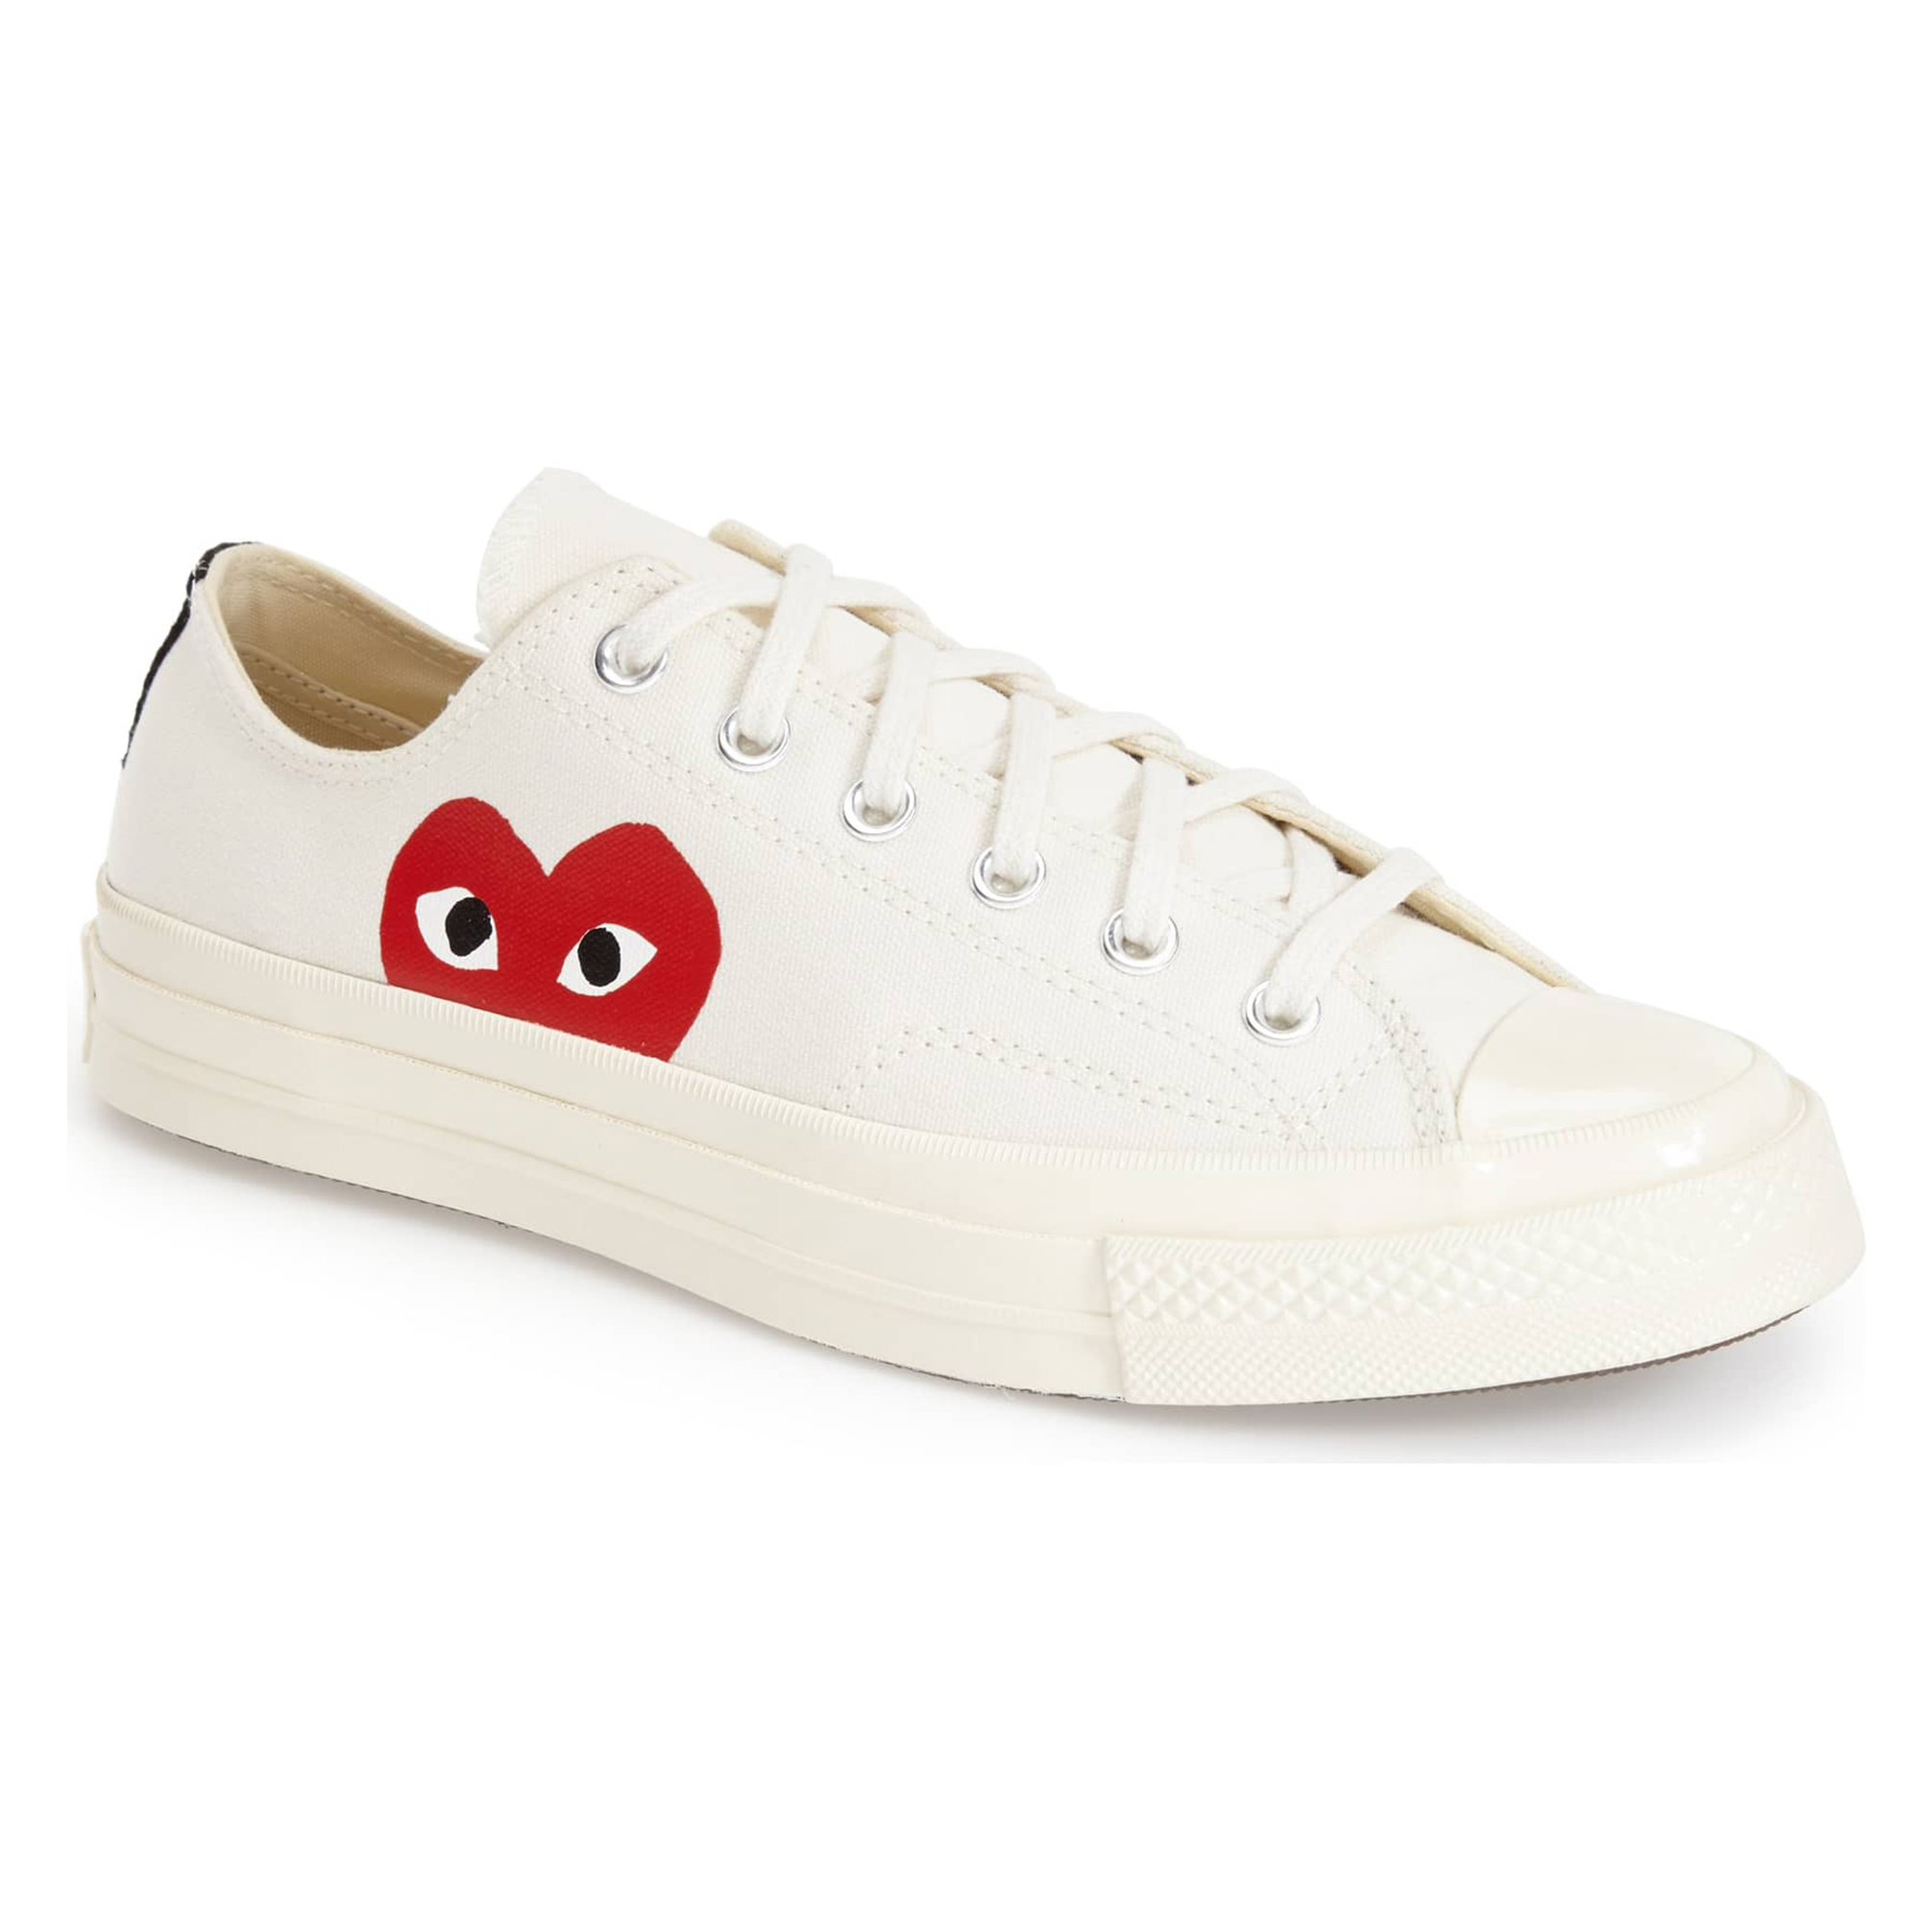 Thriller World window sofa This Converse X Comme des Garcons Sneaker Is Too Cute